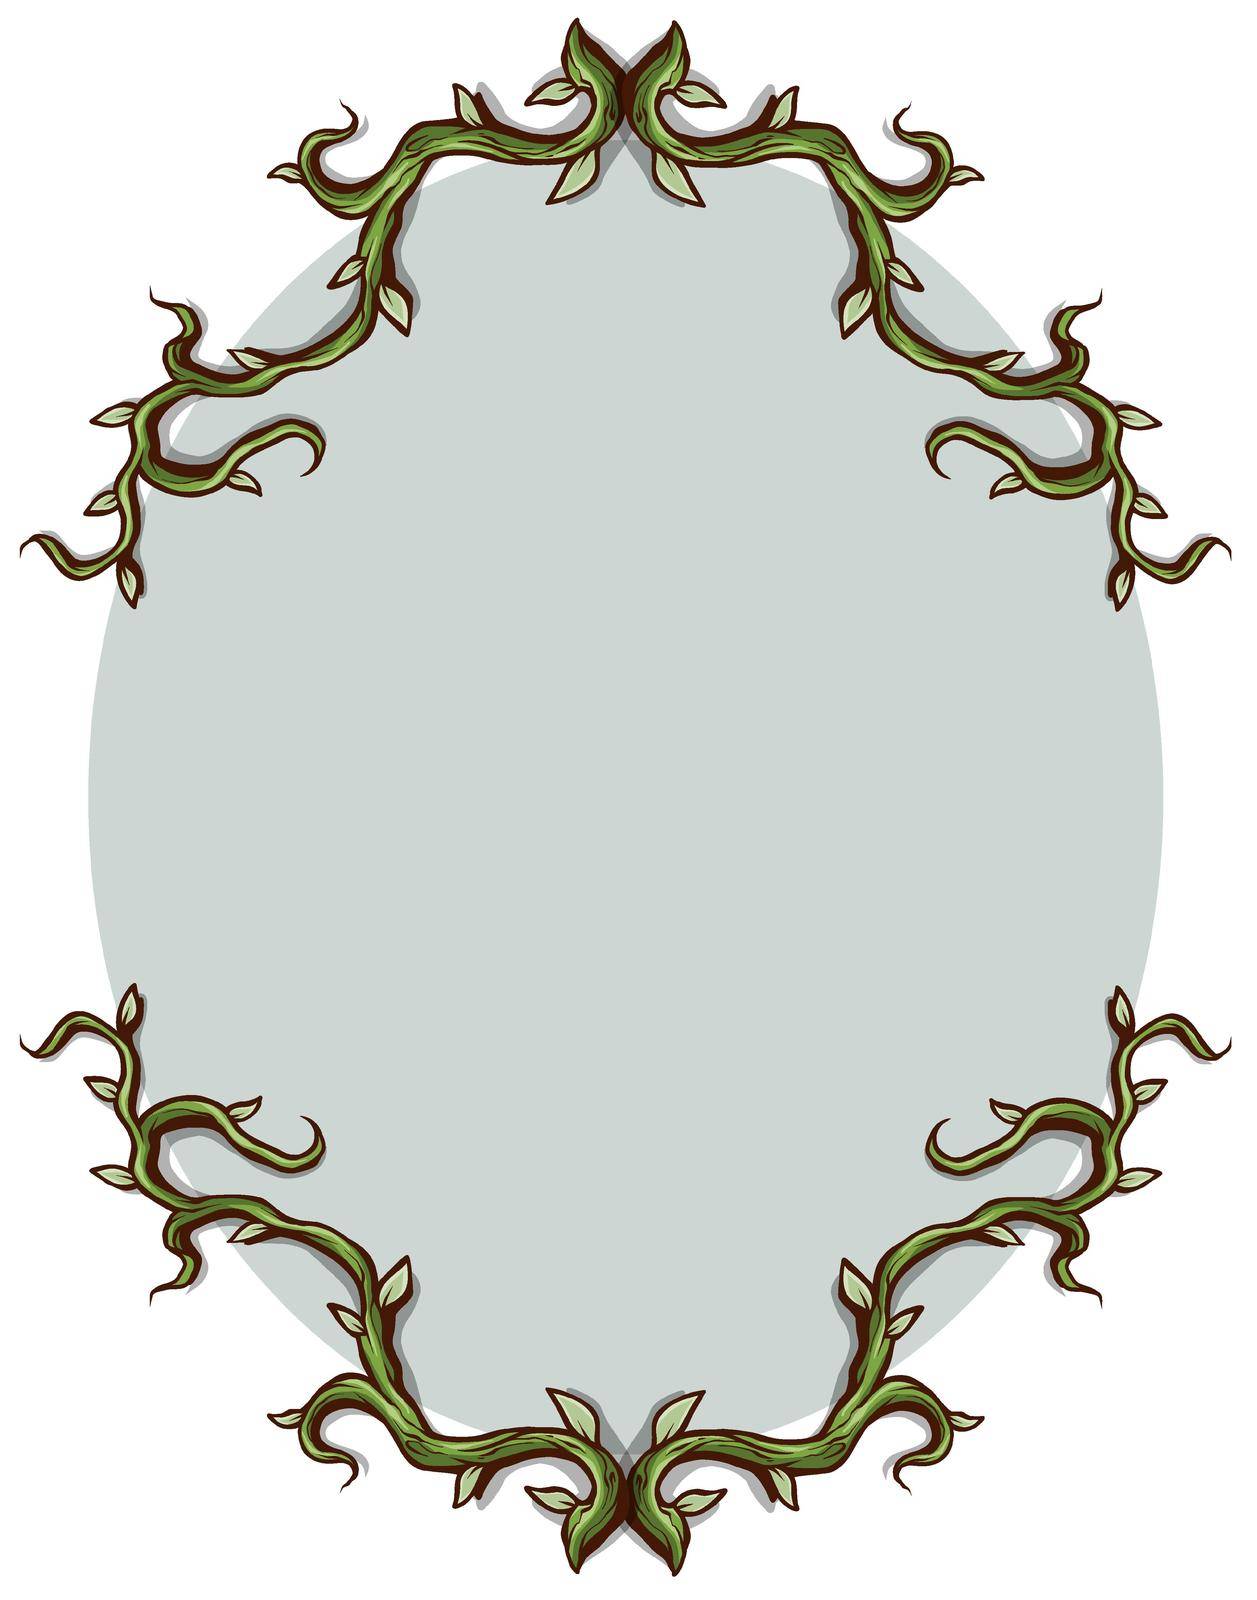 Graphic cartoon oval green border frame branch, stem with leaves. Isolated on white background. Vector icon.